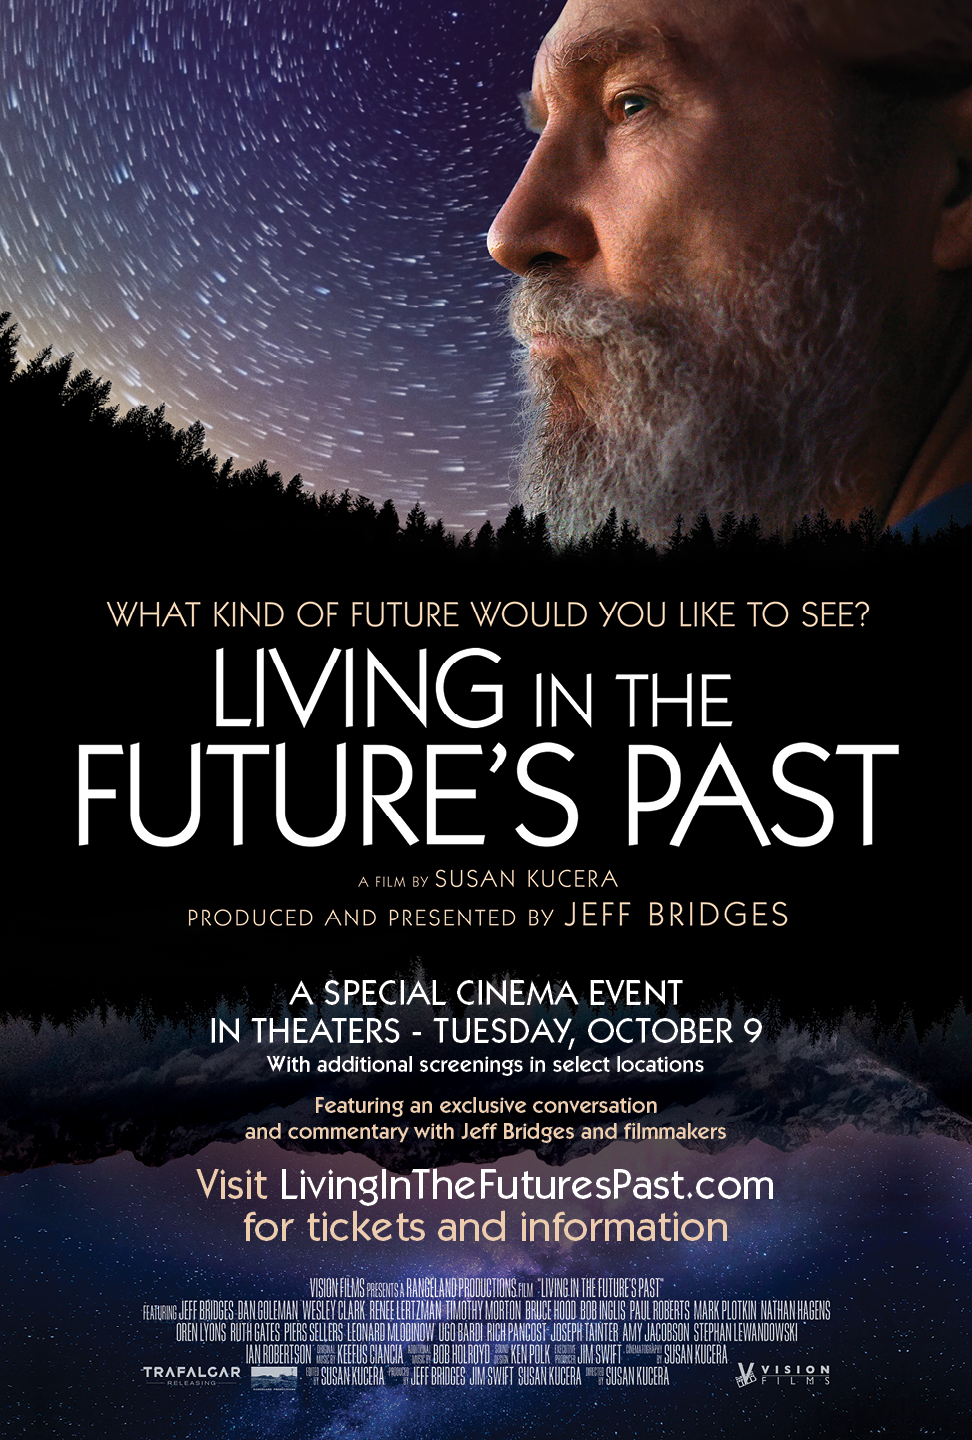 publicity poster featuring Jeff Bridges for "Living in the Future's Past"